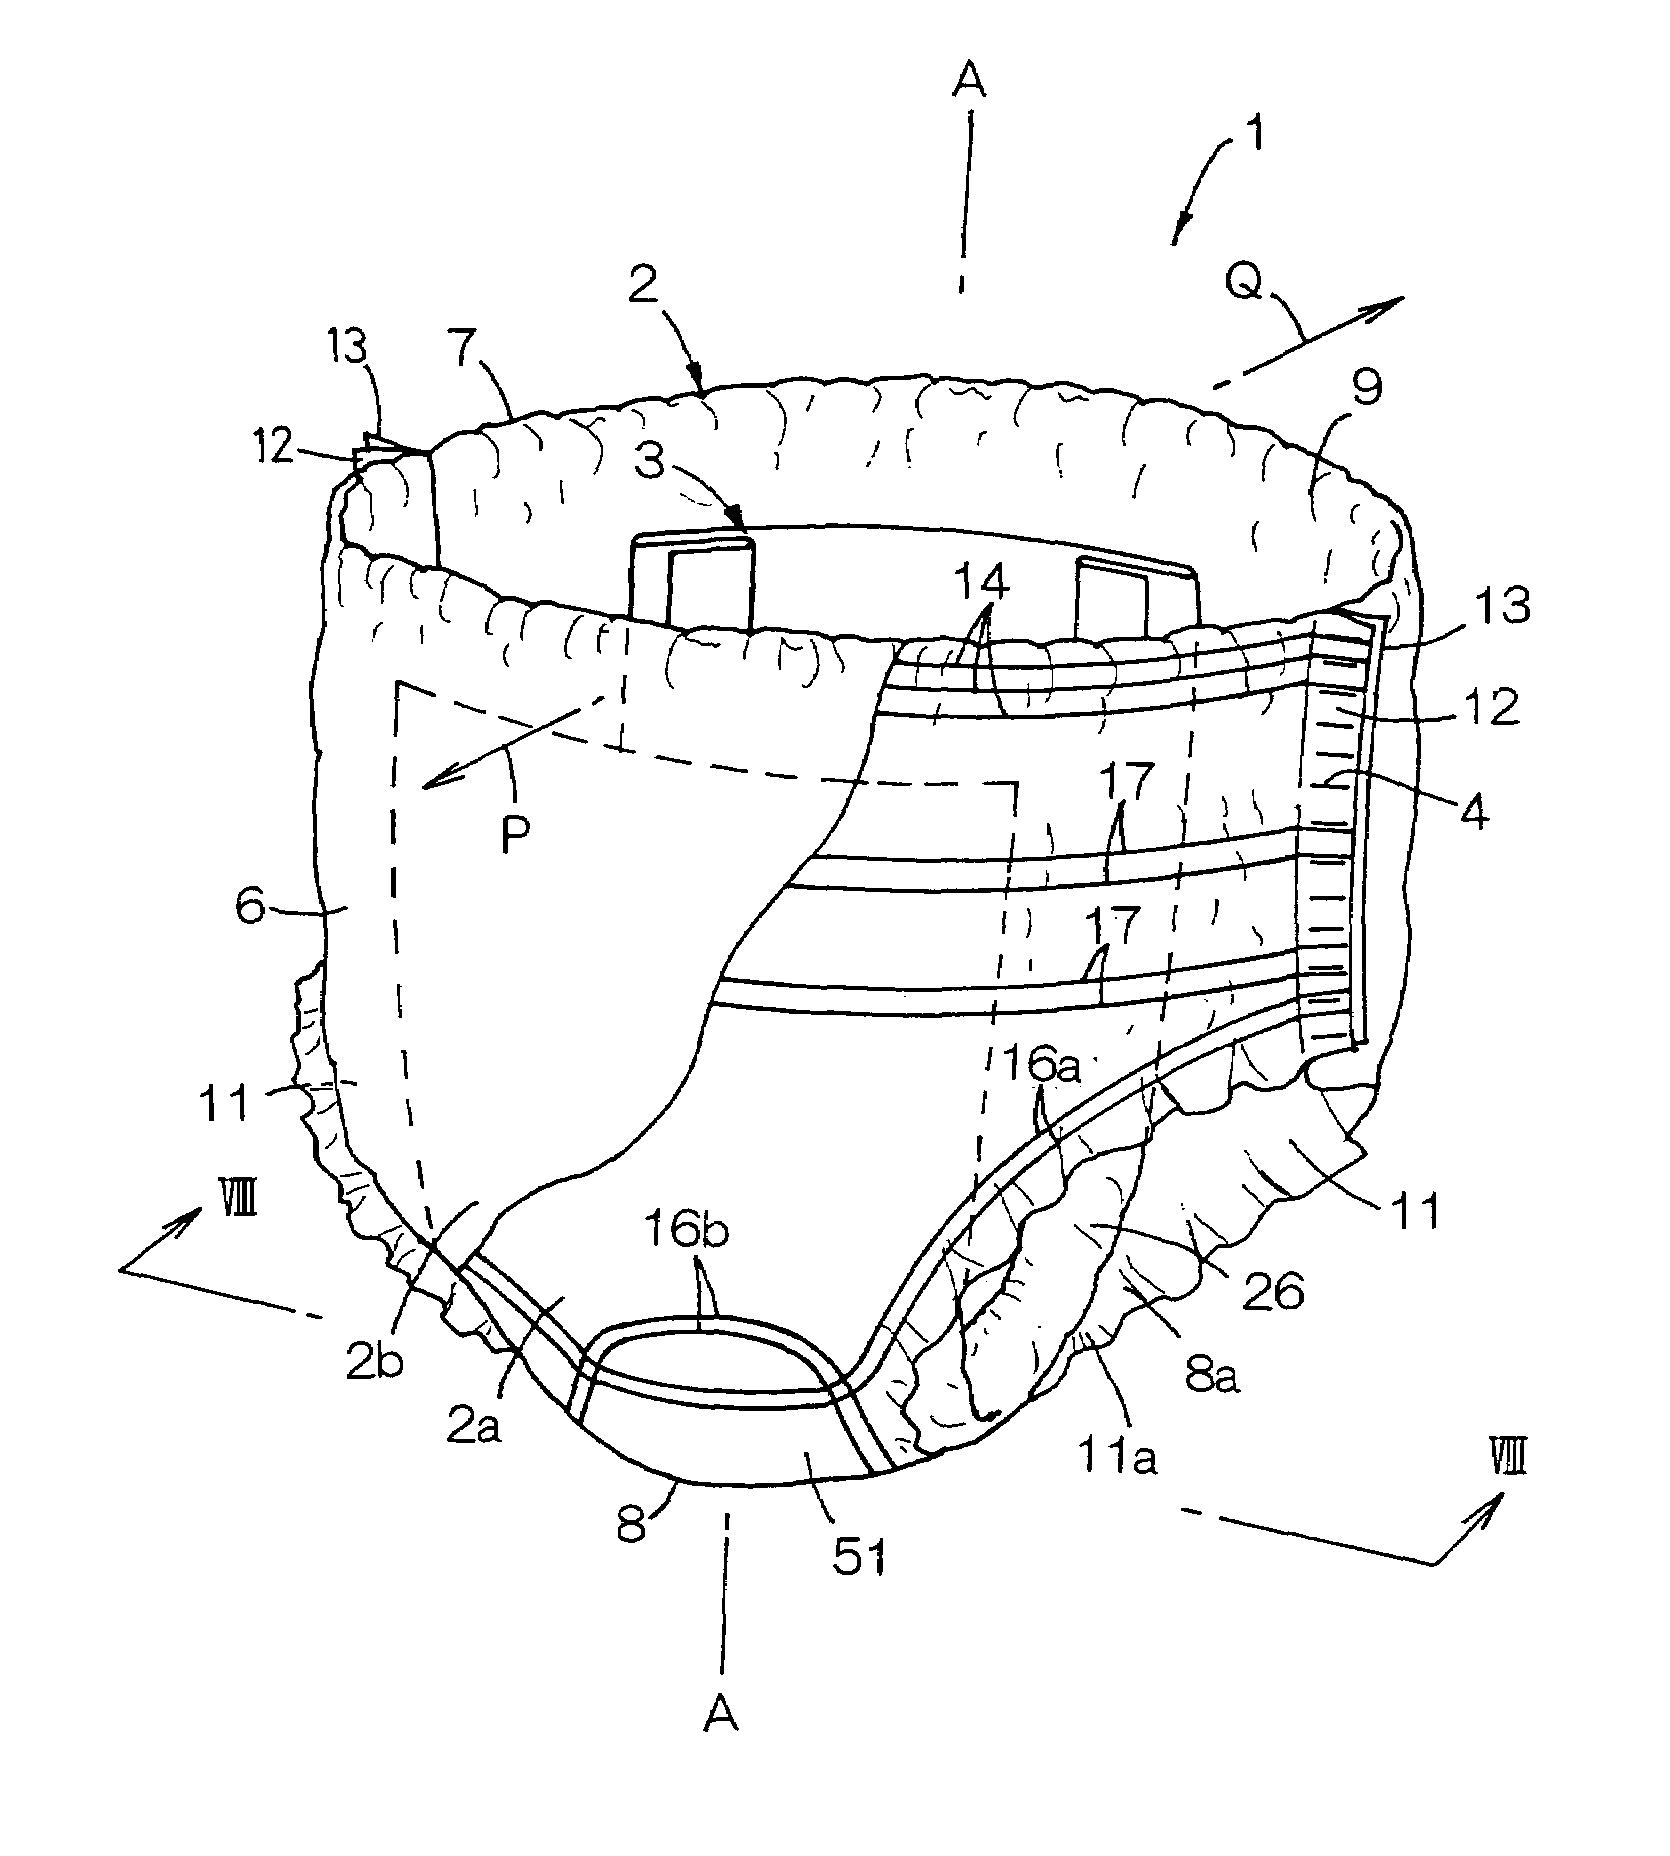 Disposable wearing article having multilayered core comprising convex gaps and v-shaped cutouts